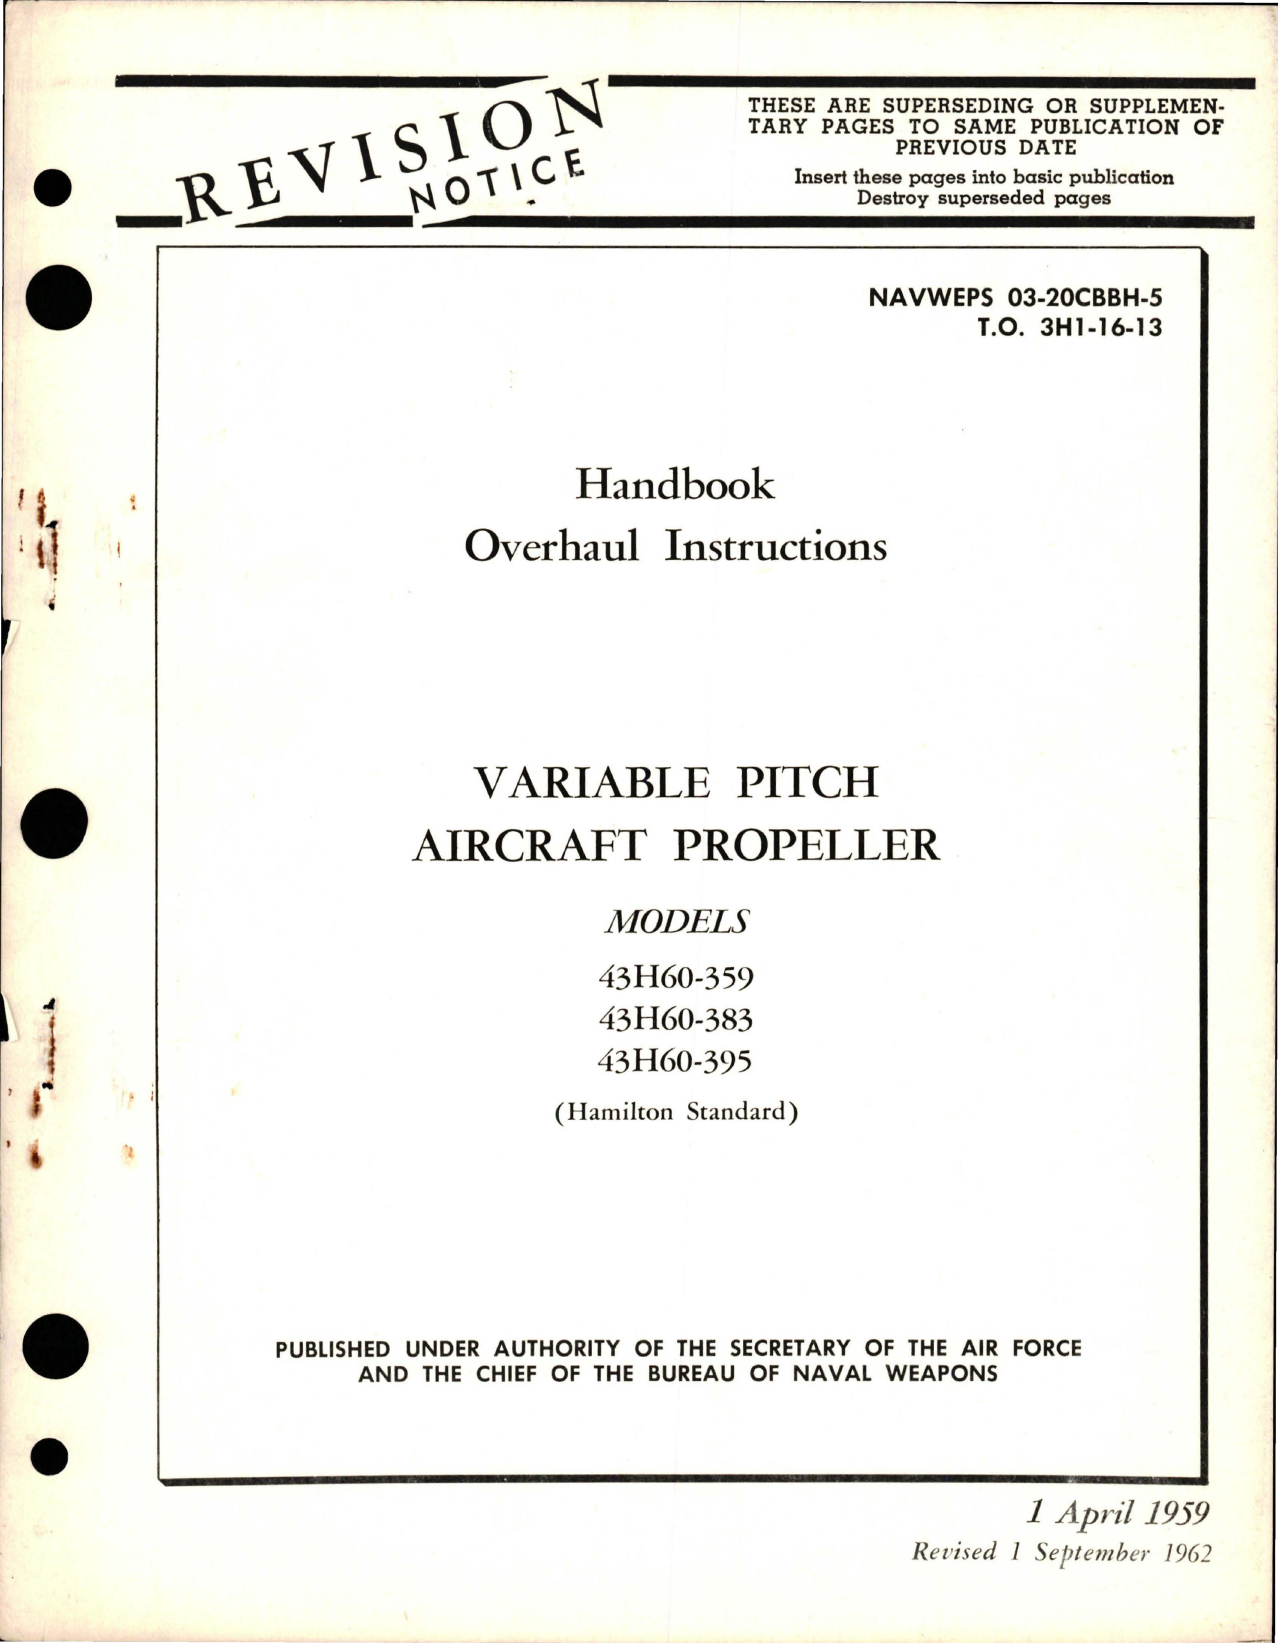 Sample page 1 from AirCorps Library document: Overhaul Instructions for Variable Pitch Propeller - Models 43H60-359, 43H60-383, and 43H60-395